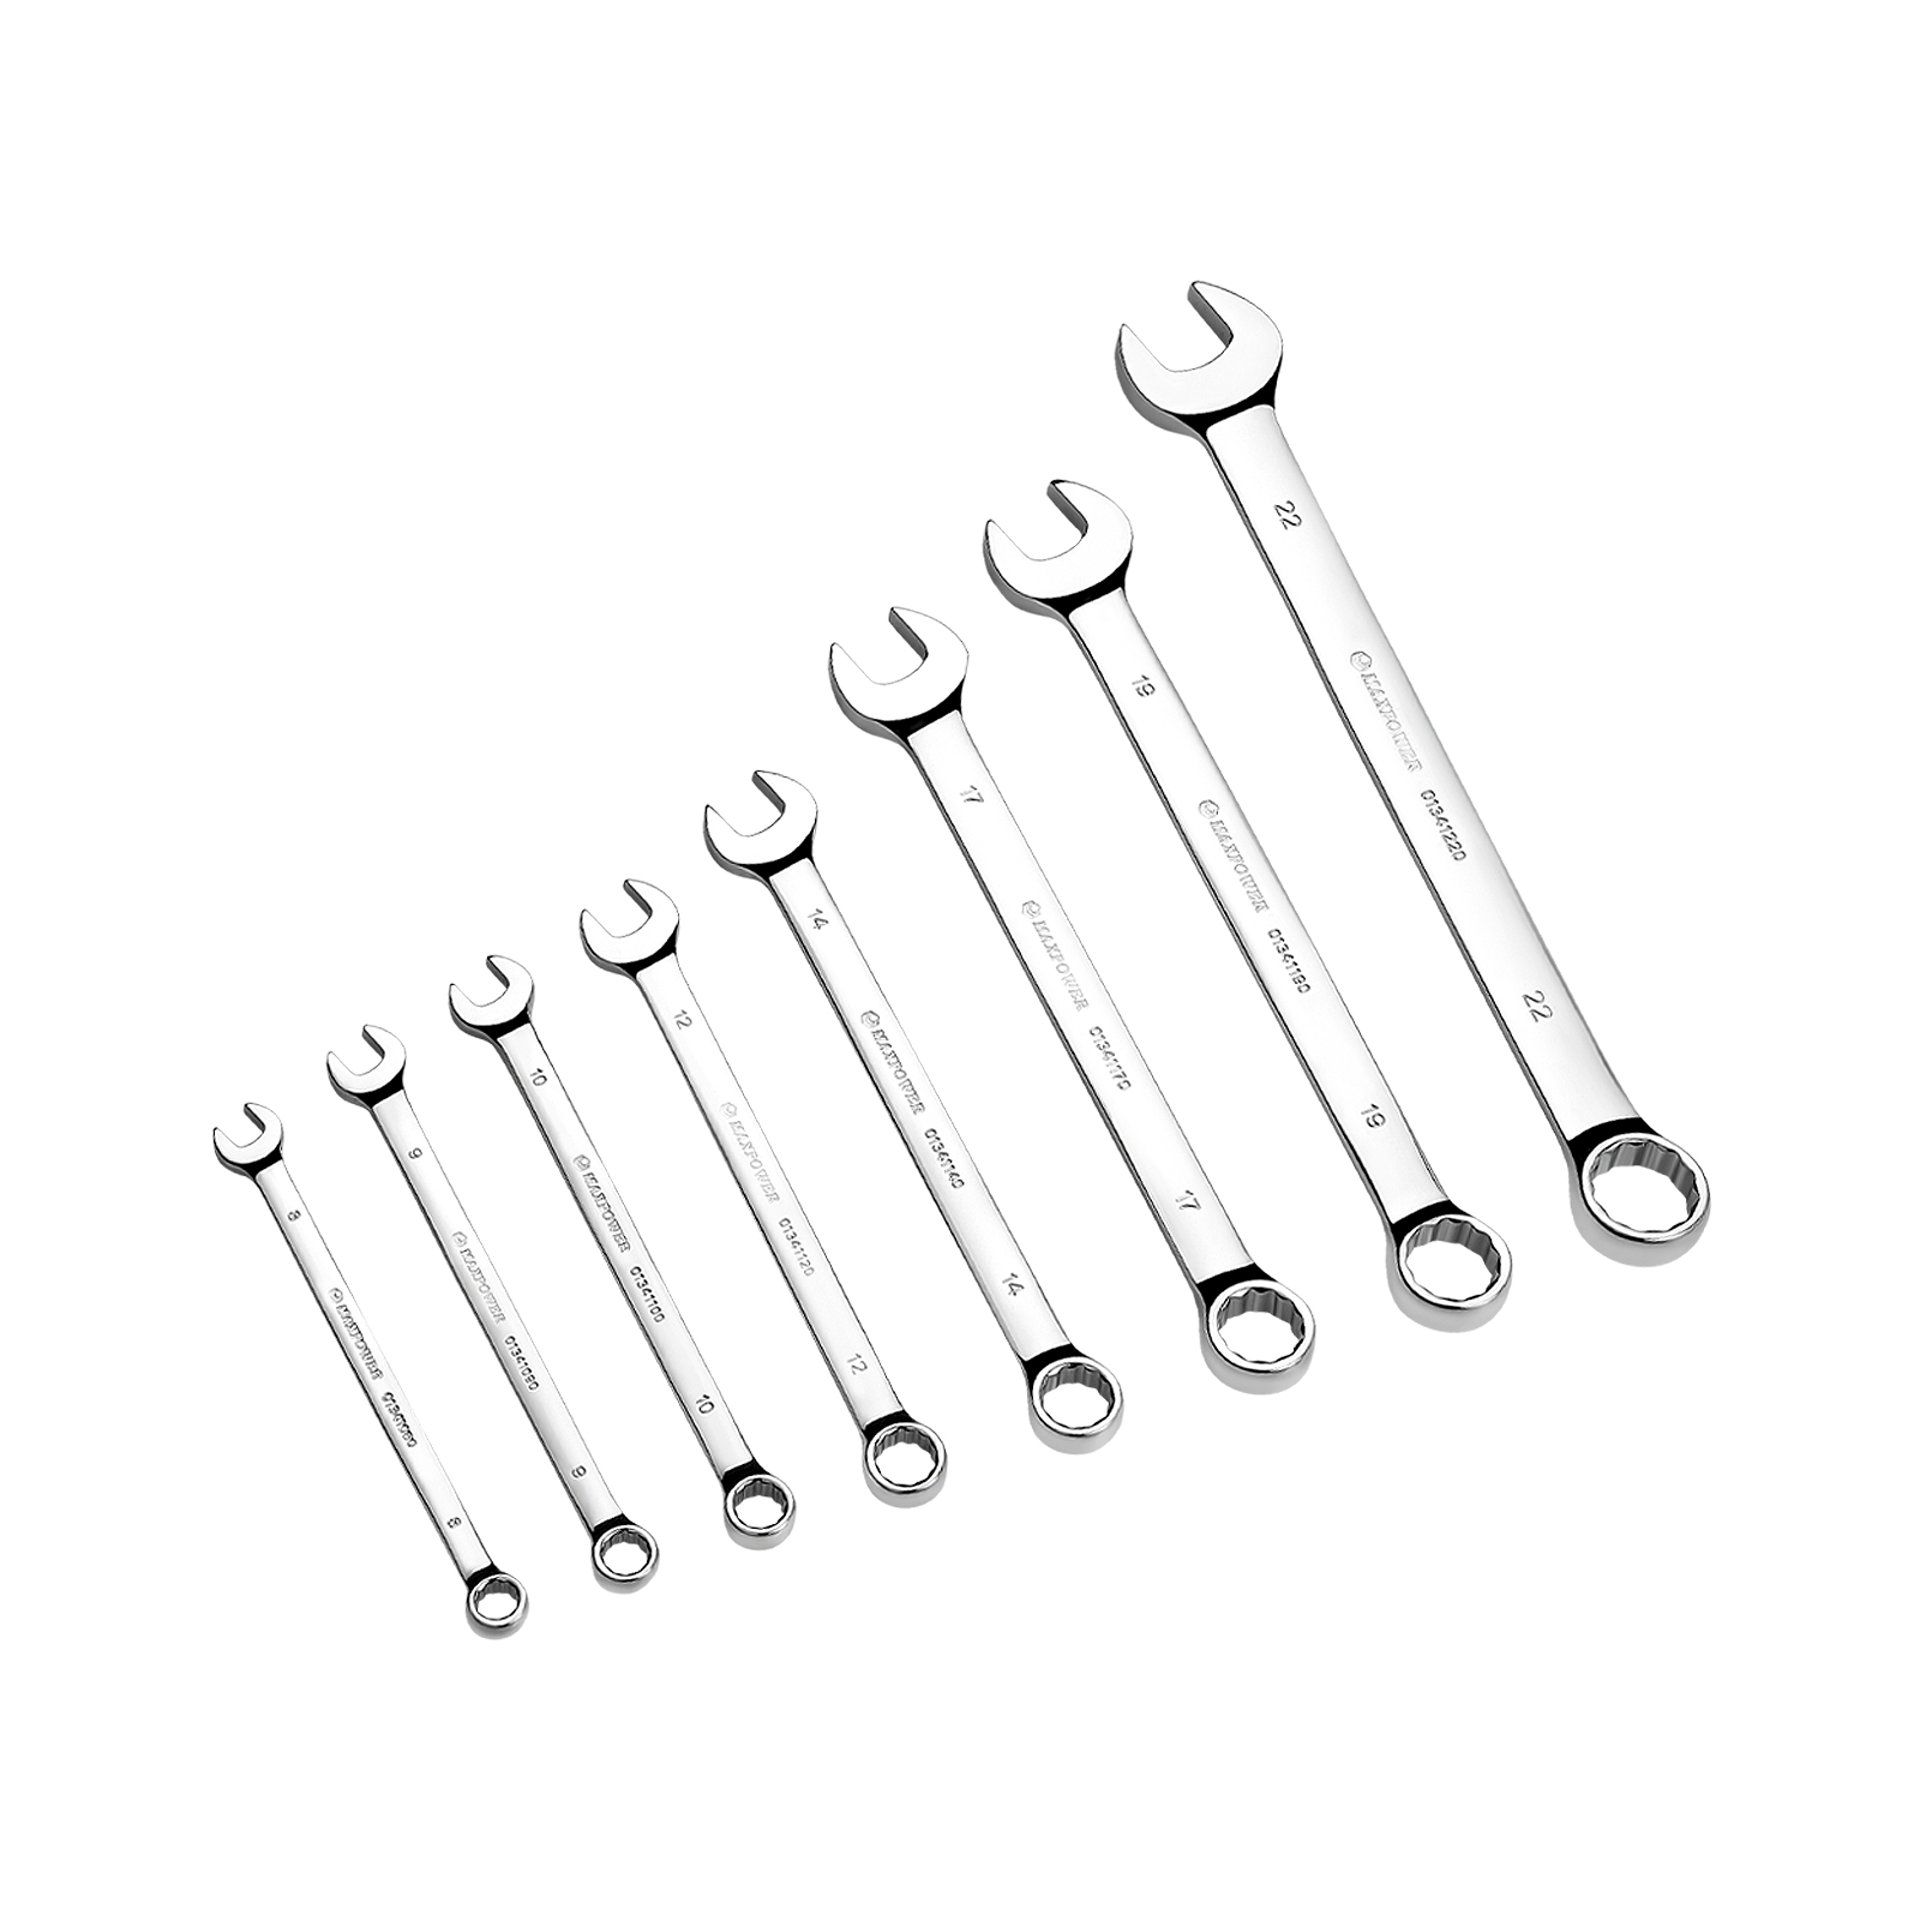 MAXPOWER 8-piece Metric Combination Wrench Set